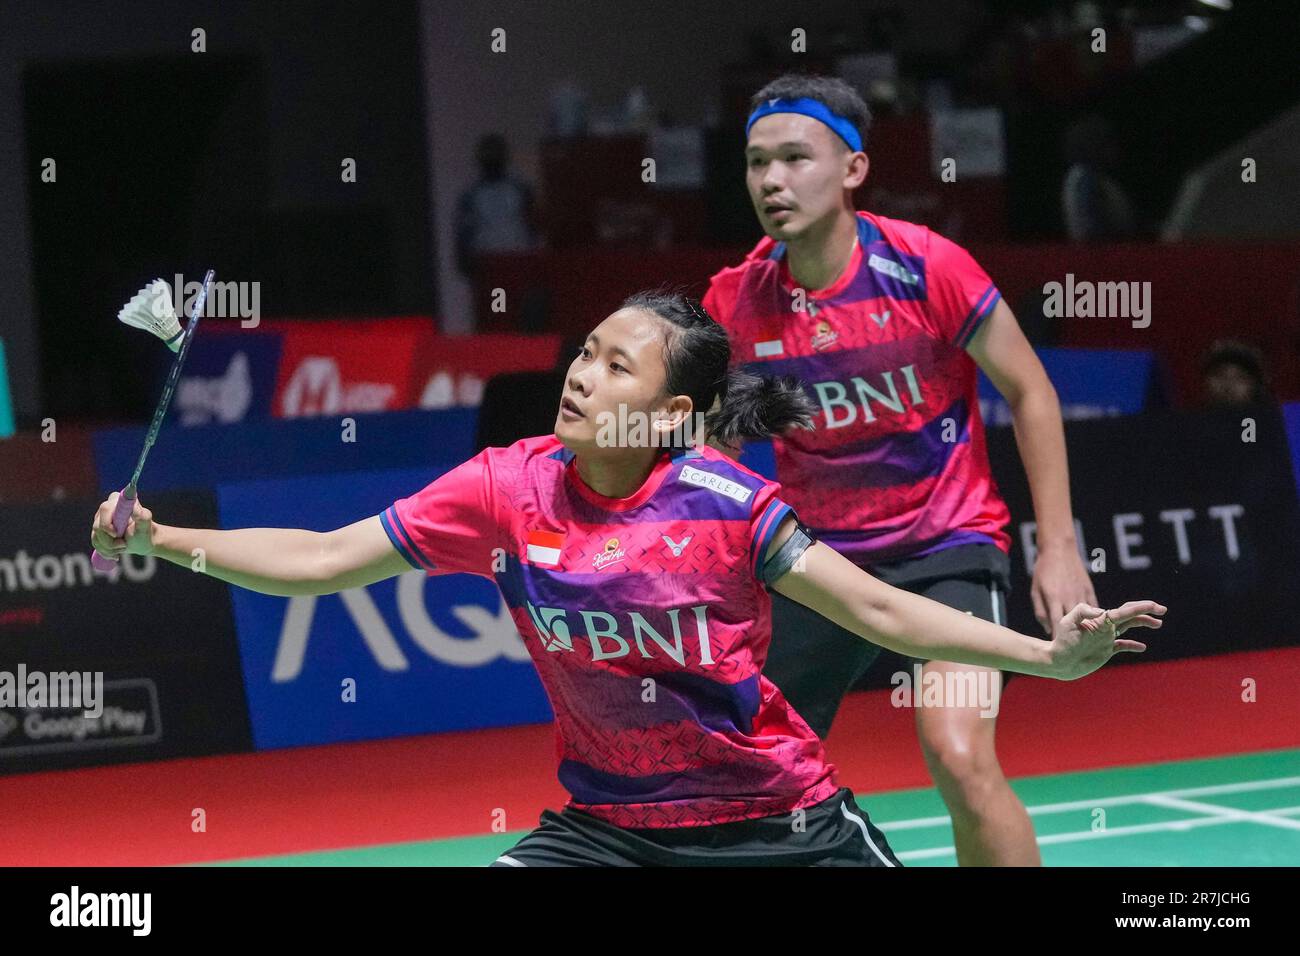 Indonesias Pitha Haningtyas Mentari, left, with Rinov Rivaldy plays against Japans Yuta Watanabe and Arisa Higashino during their mixed doubles quarter final match at Indonesia Open badminton tournament at Istora Stadium in